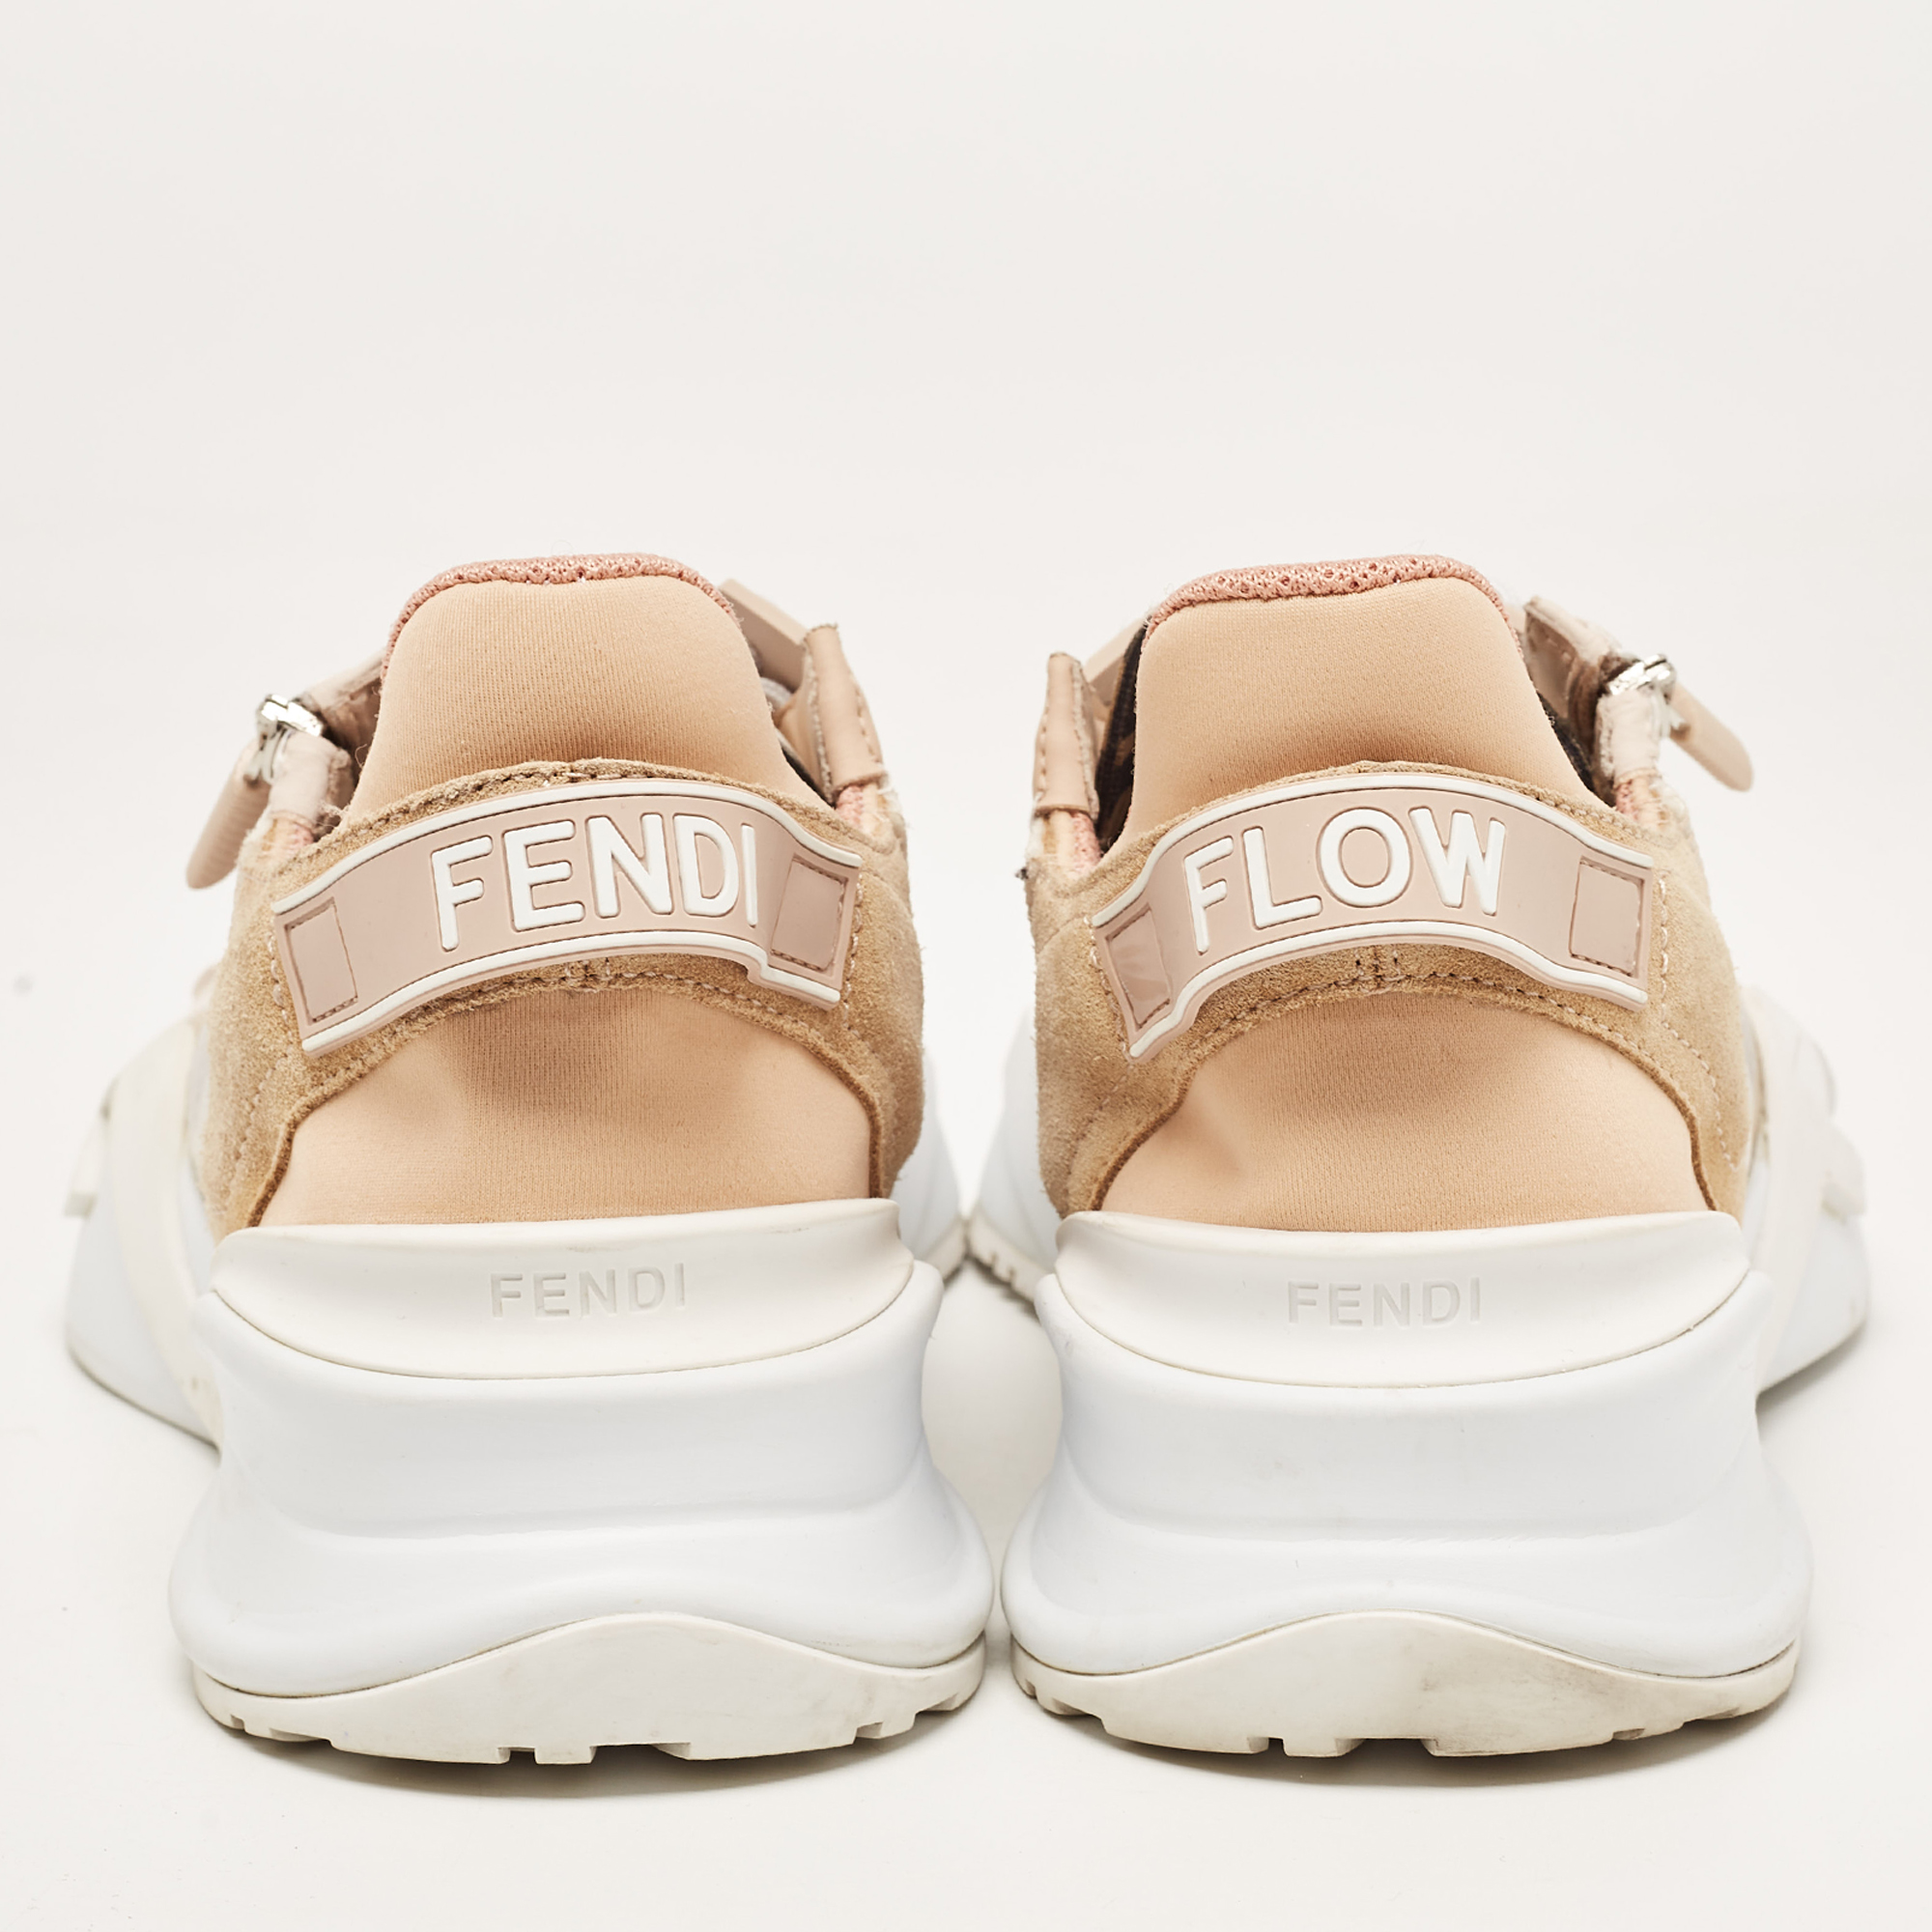 Fendi Tricolor Suede And Mesh Flow Low Top Sneakers Size 38